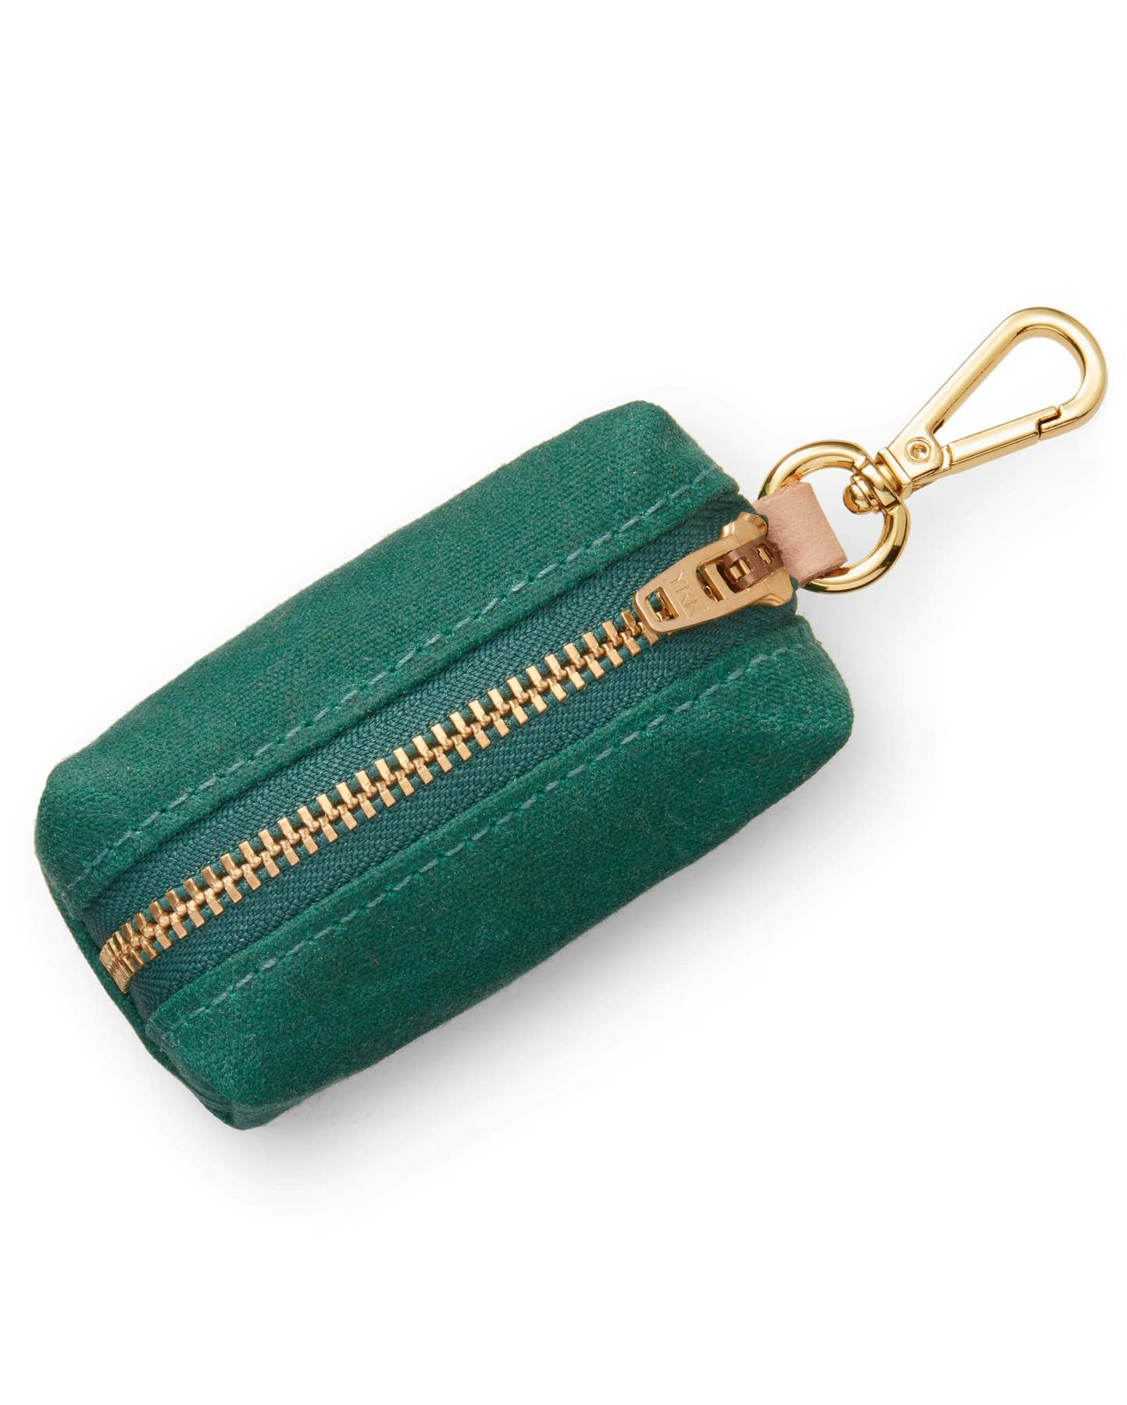 Waxed green cotton canvas is complete with elevated brass hardware. Sleek clasp easily attaches to your leash's O ring. There's no mess left behind with this adorable accessory.